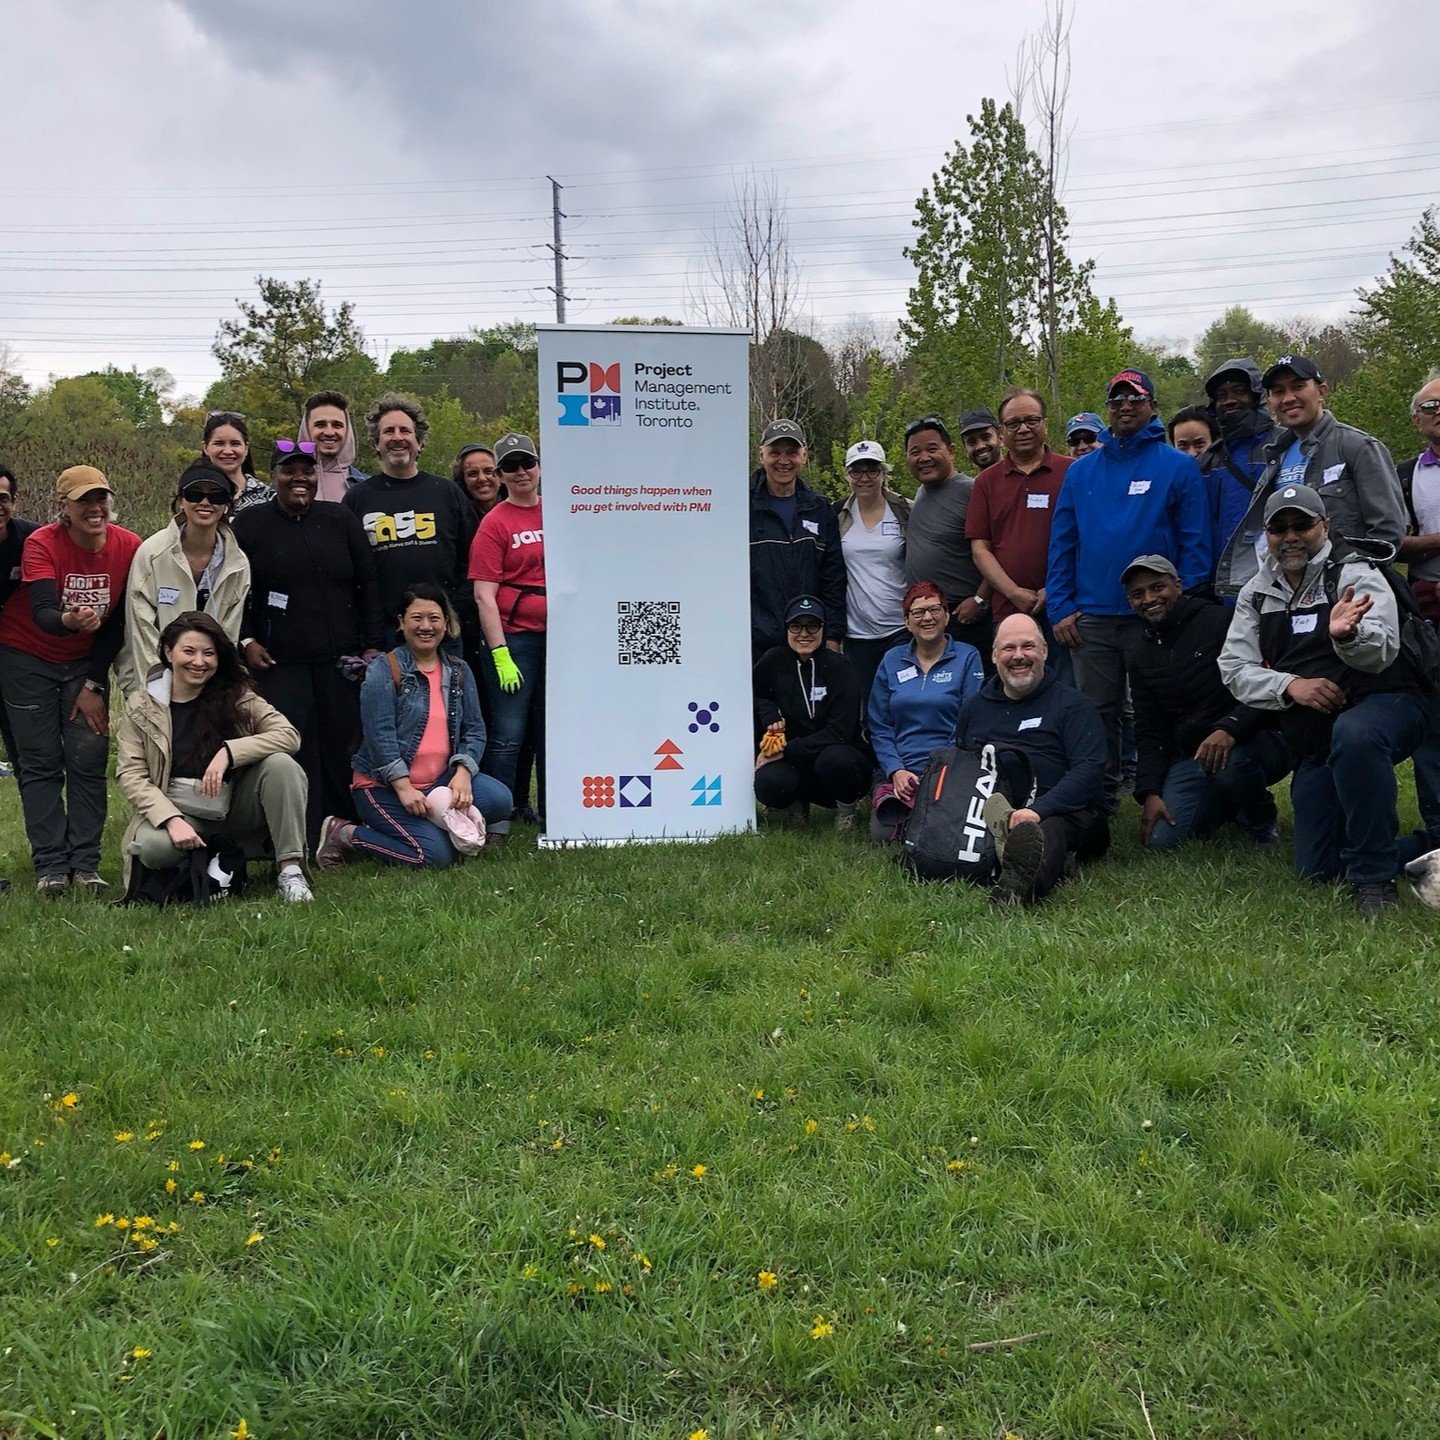 DMWTD has had so many great groups come out recently for stewardship including Royal Bank and First Service. This past Saturday we had a wonderful group from @pmitoronto (Project Management Institute).
A wonderful day removing invasive species includ